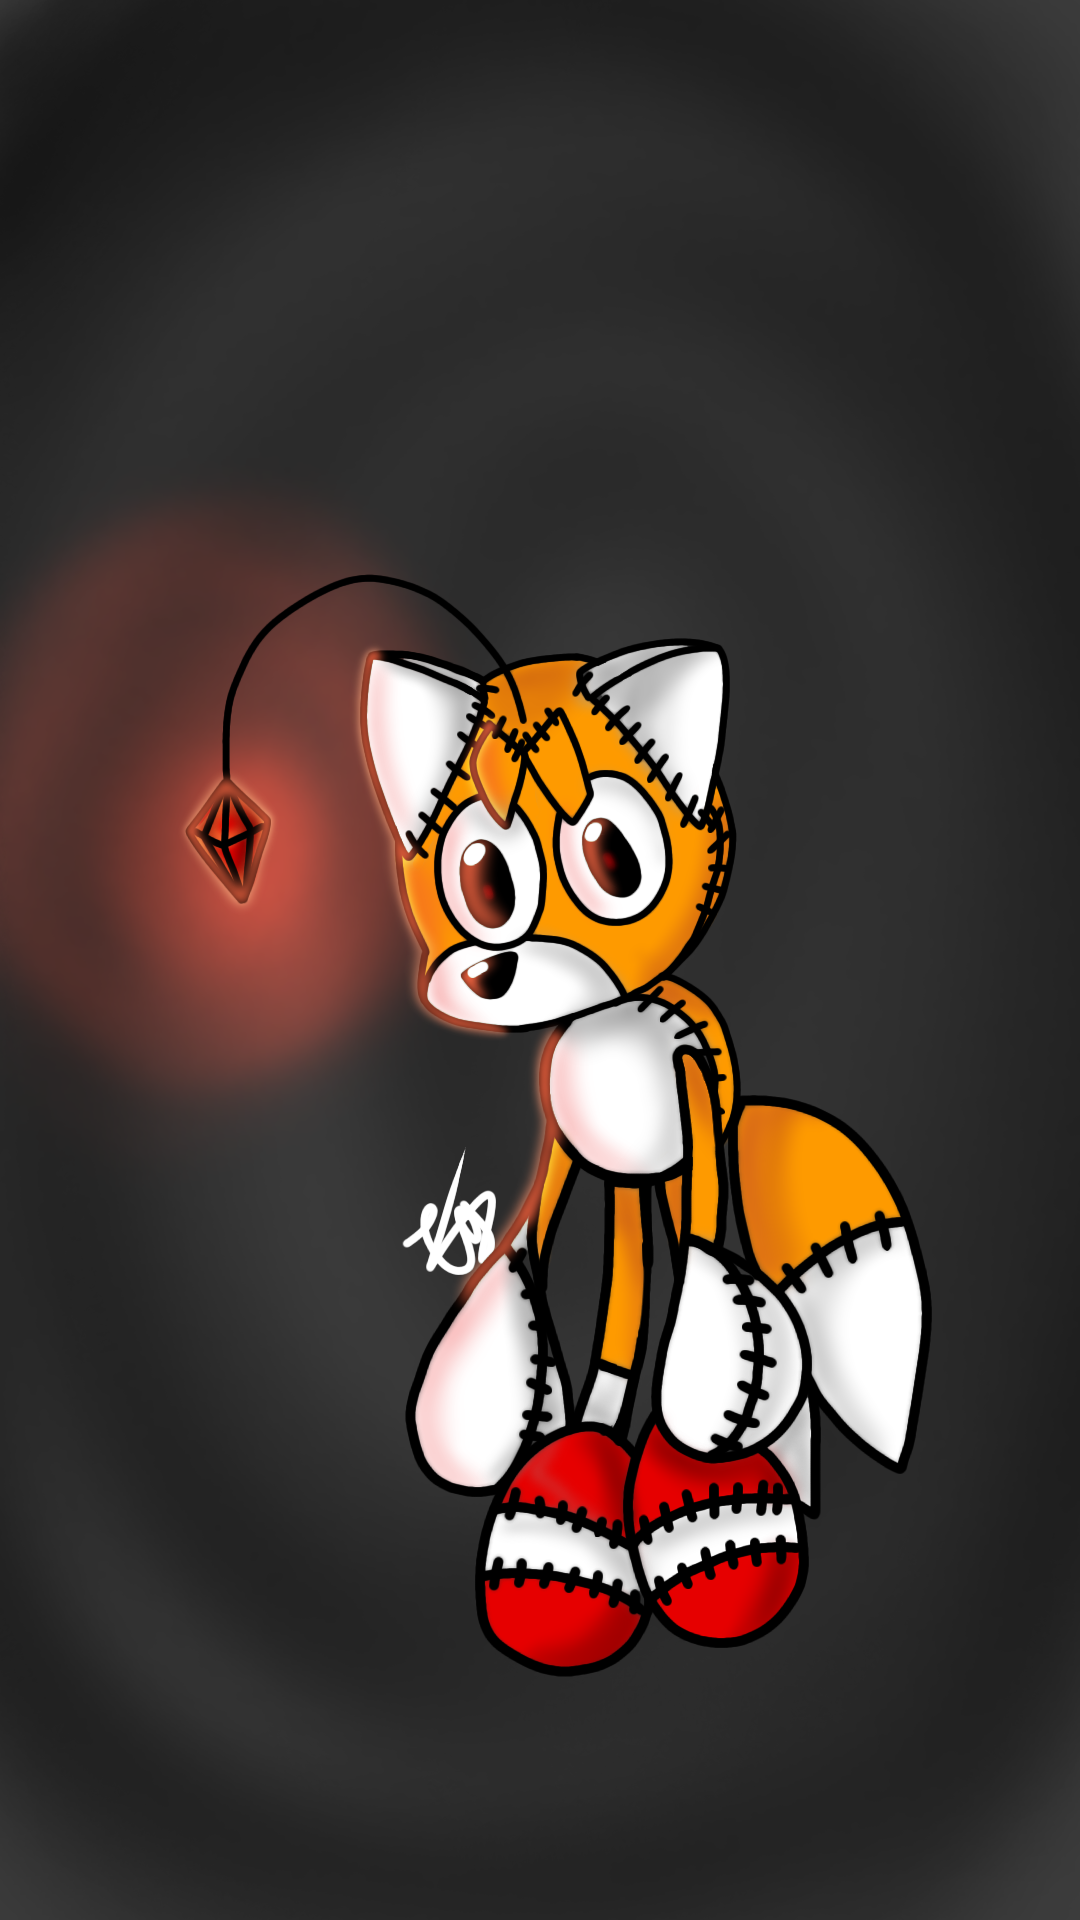 Tails Doll curse.. by GirGrunny on DeviantArt